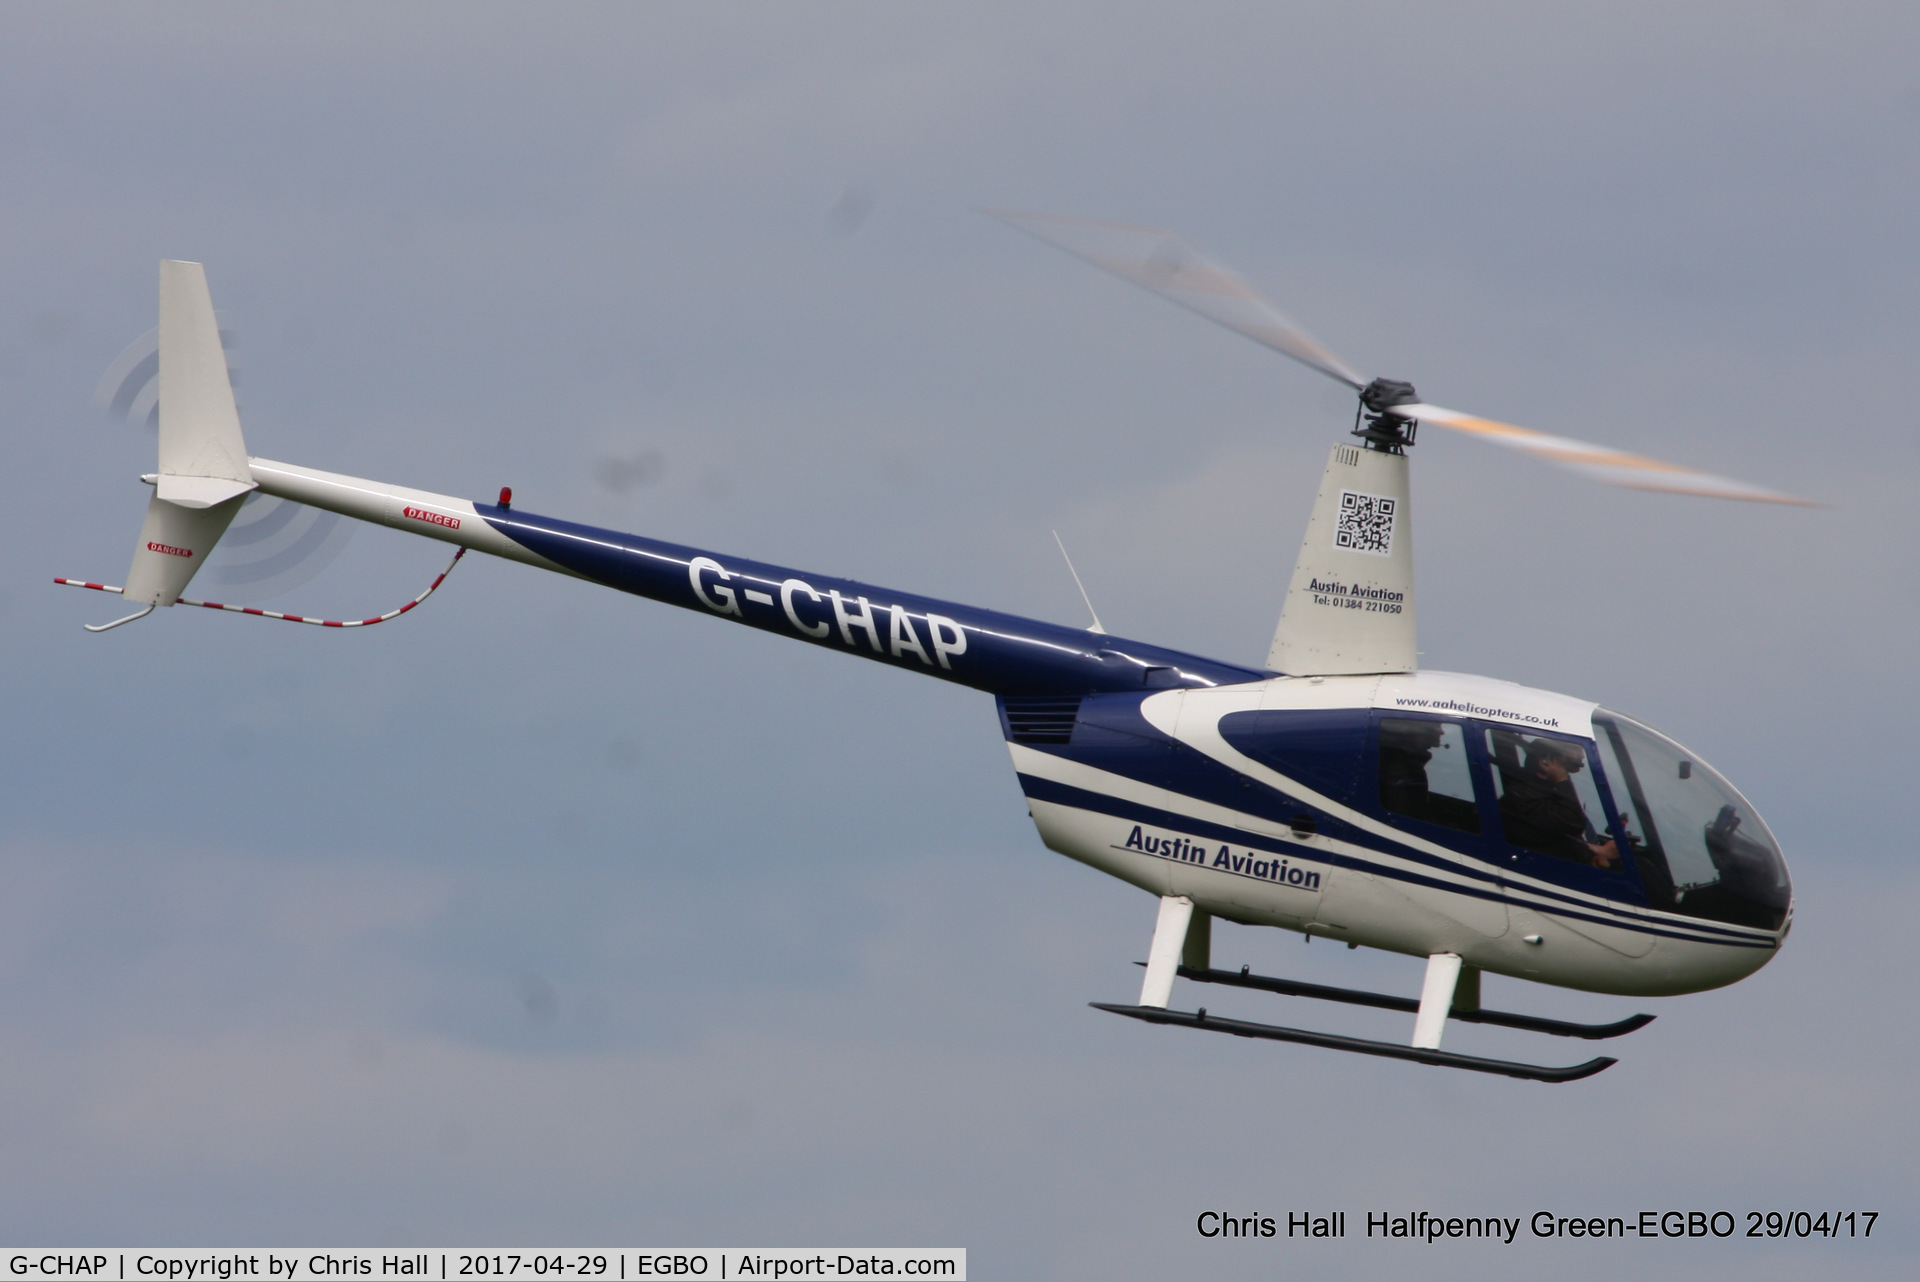 G-CHAP, 1997 Robinson R44 Astro C/N 0326, at the Radial & Trainer fly-in